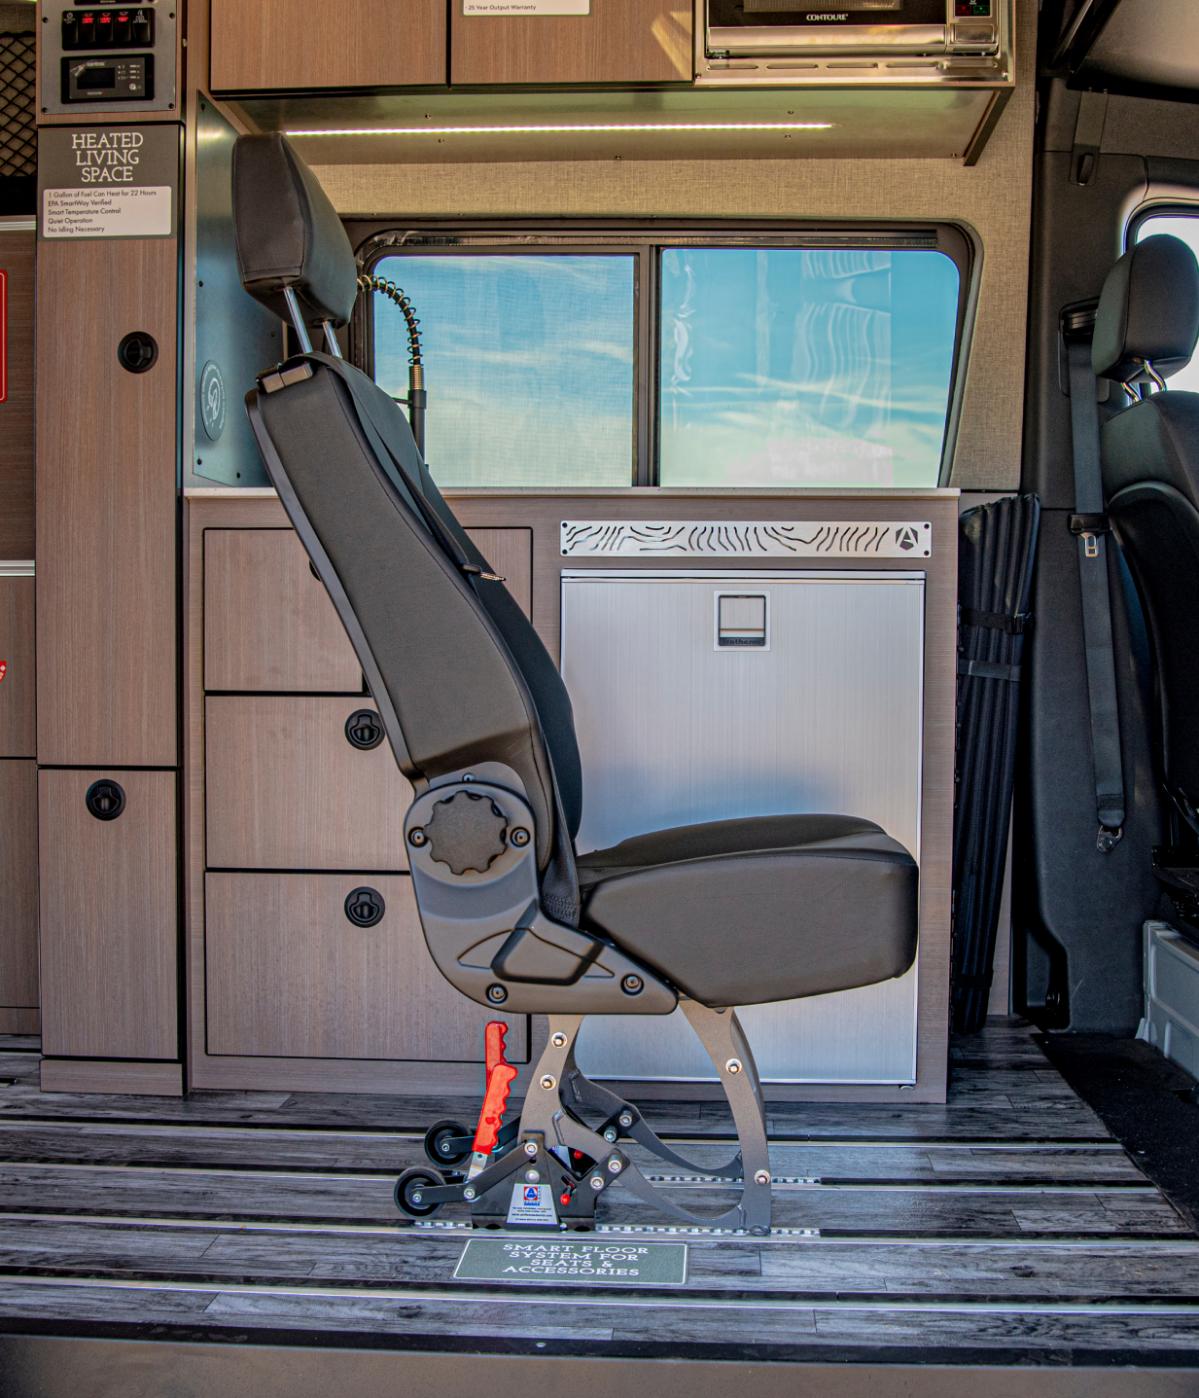 The profile of an adjustable chair inside an Antero Adventure Van